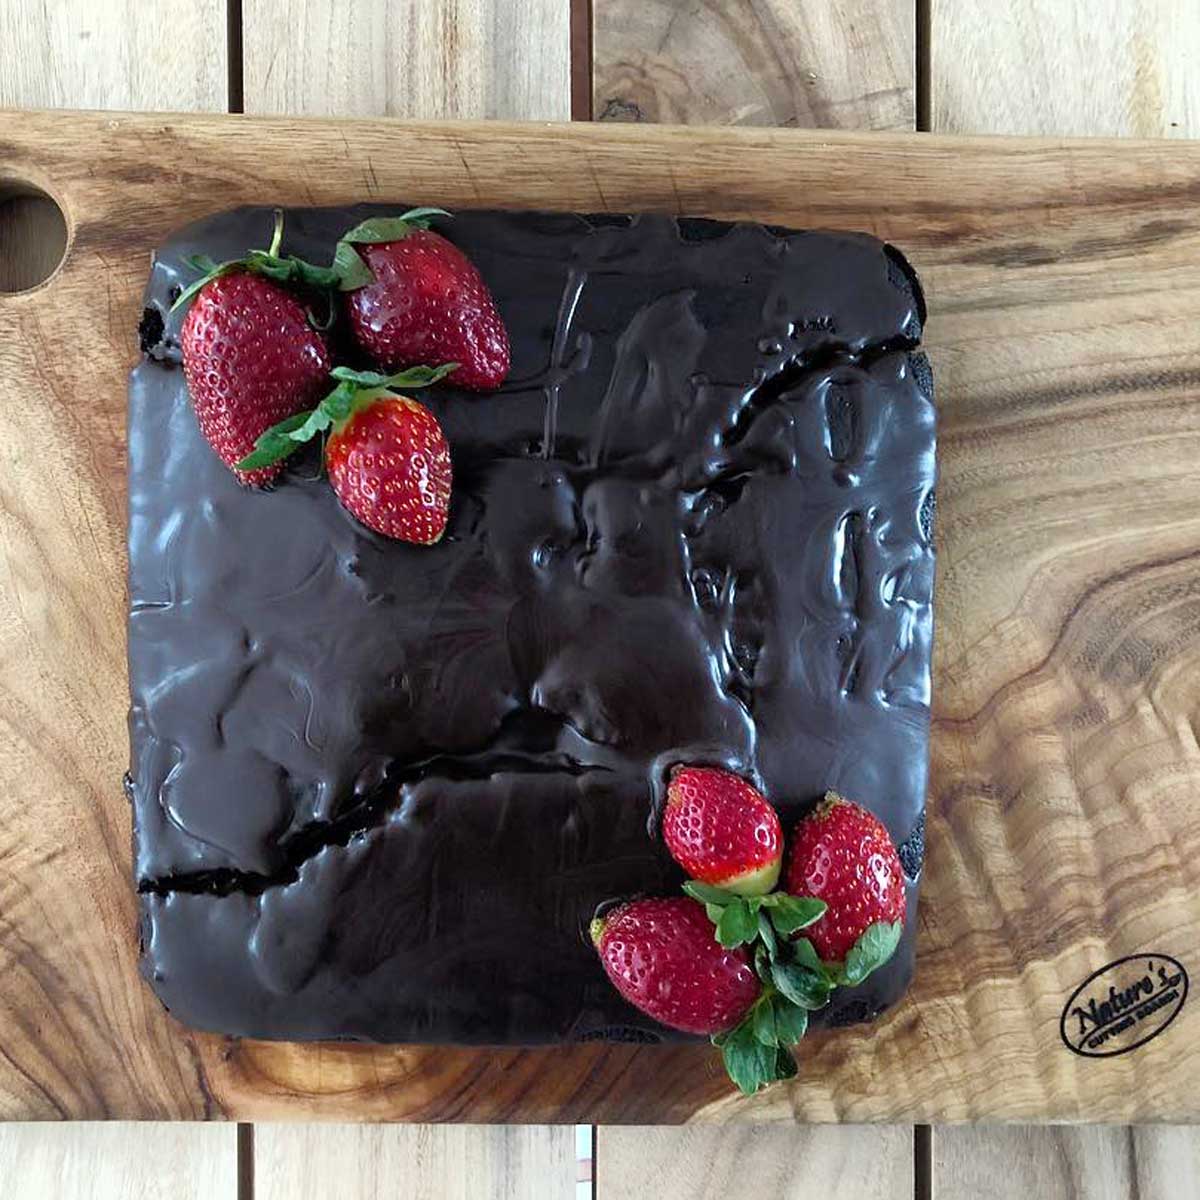 A stunning rectangular wood cutting and chopping board from Nature's Boards, designed with a round hole in one corner and decadent chocolate cake garnished with strawberries..